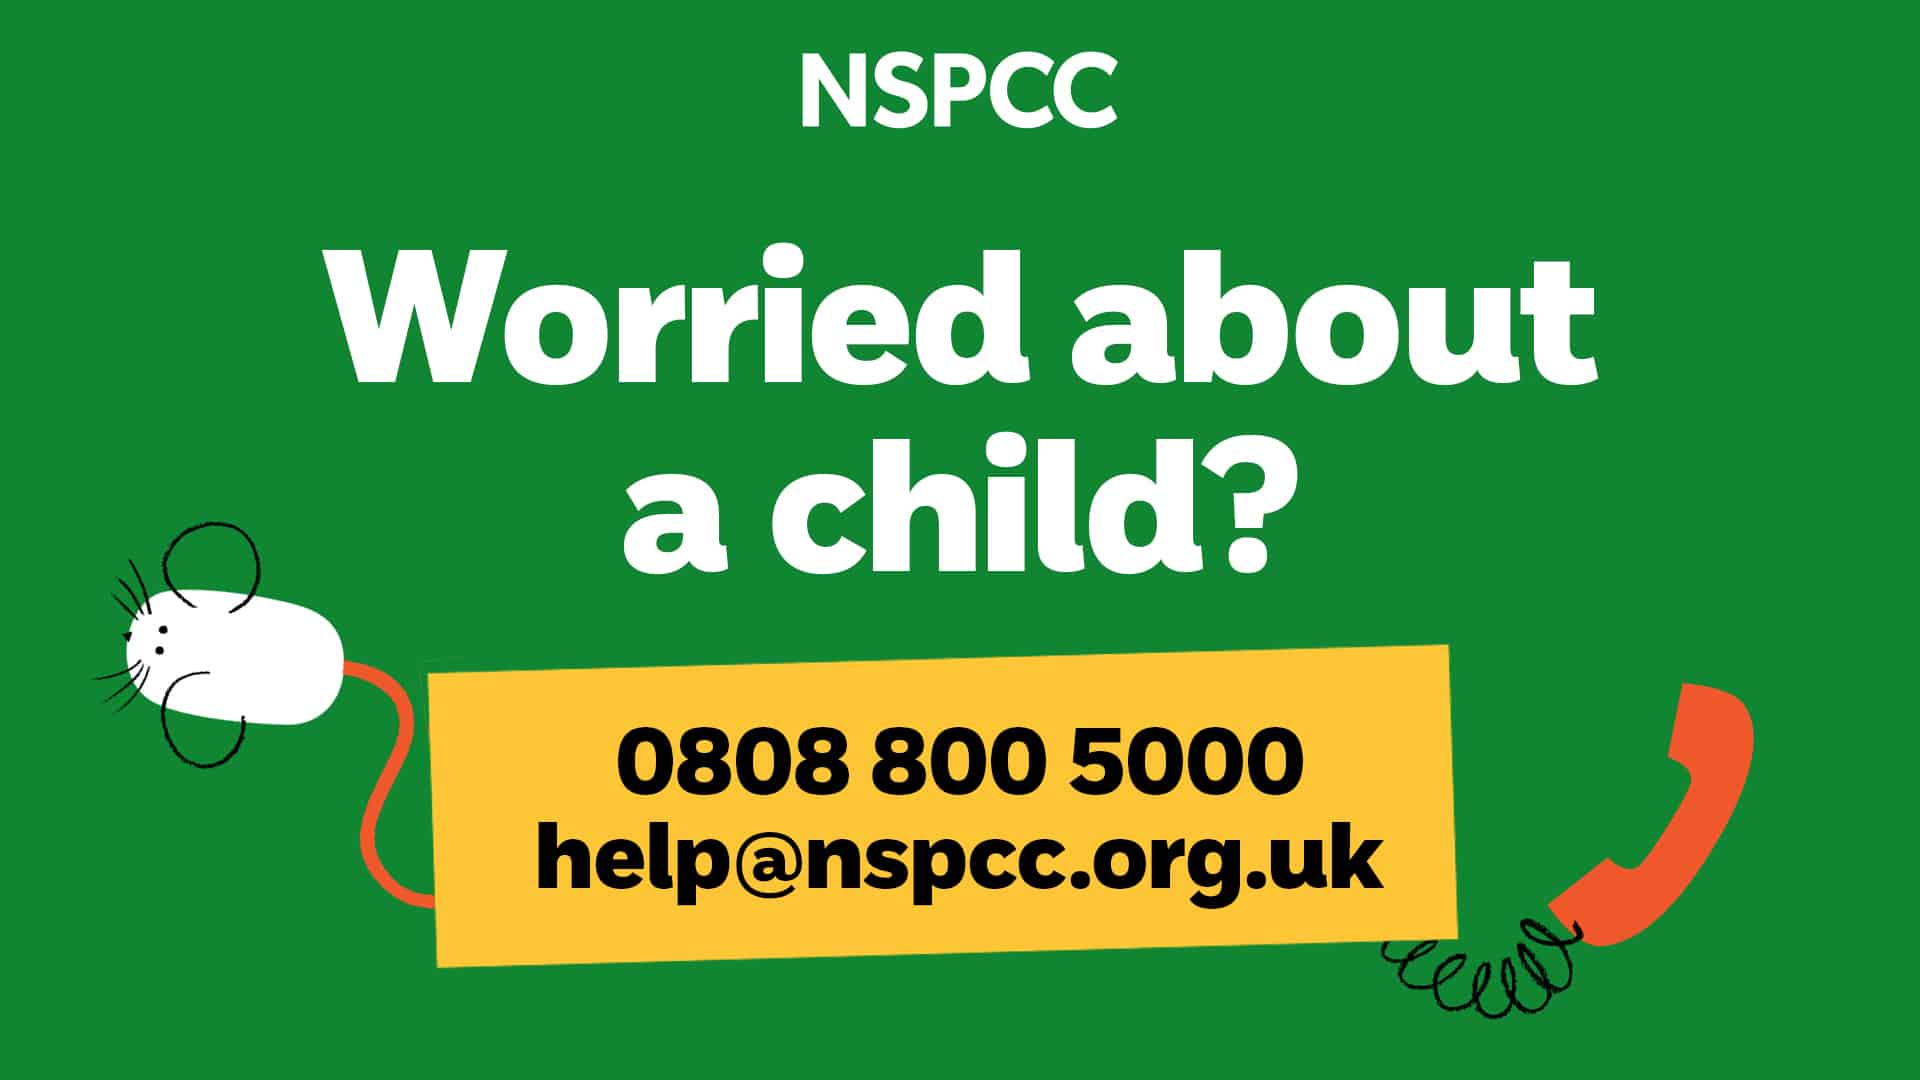 NSPCC and Department for Education Helpline campaign